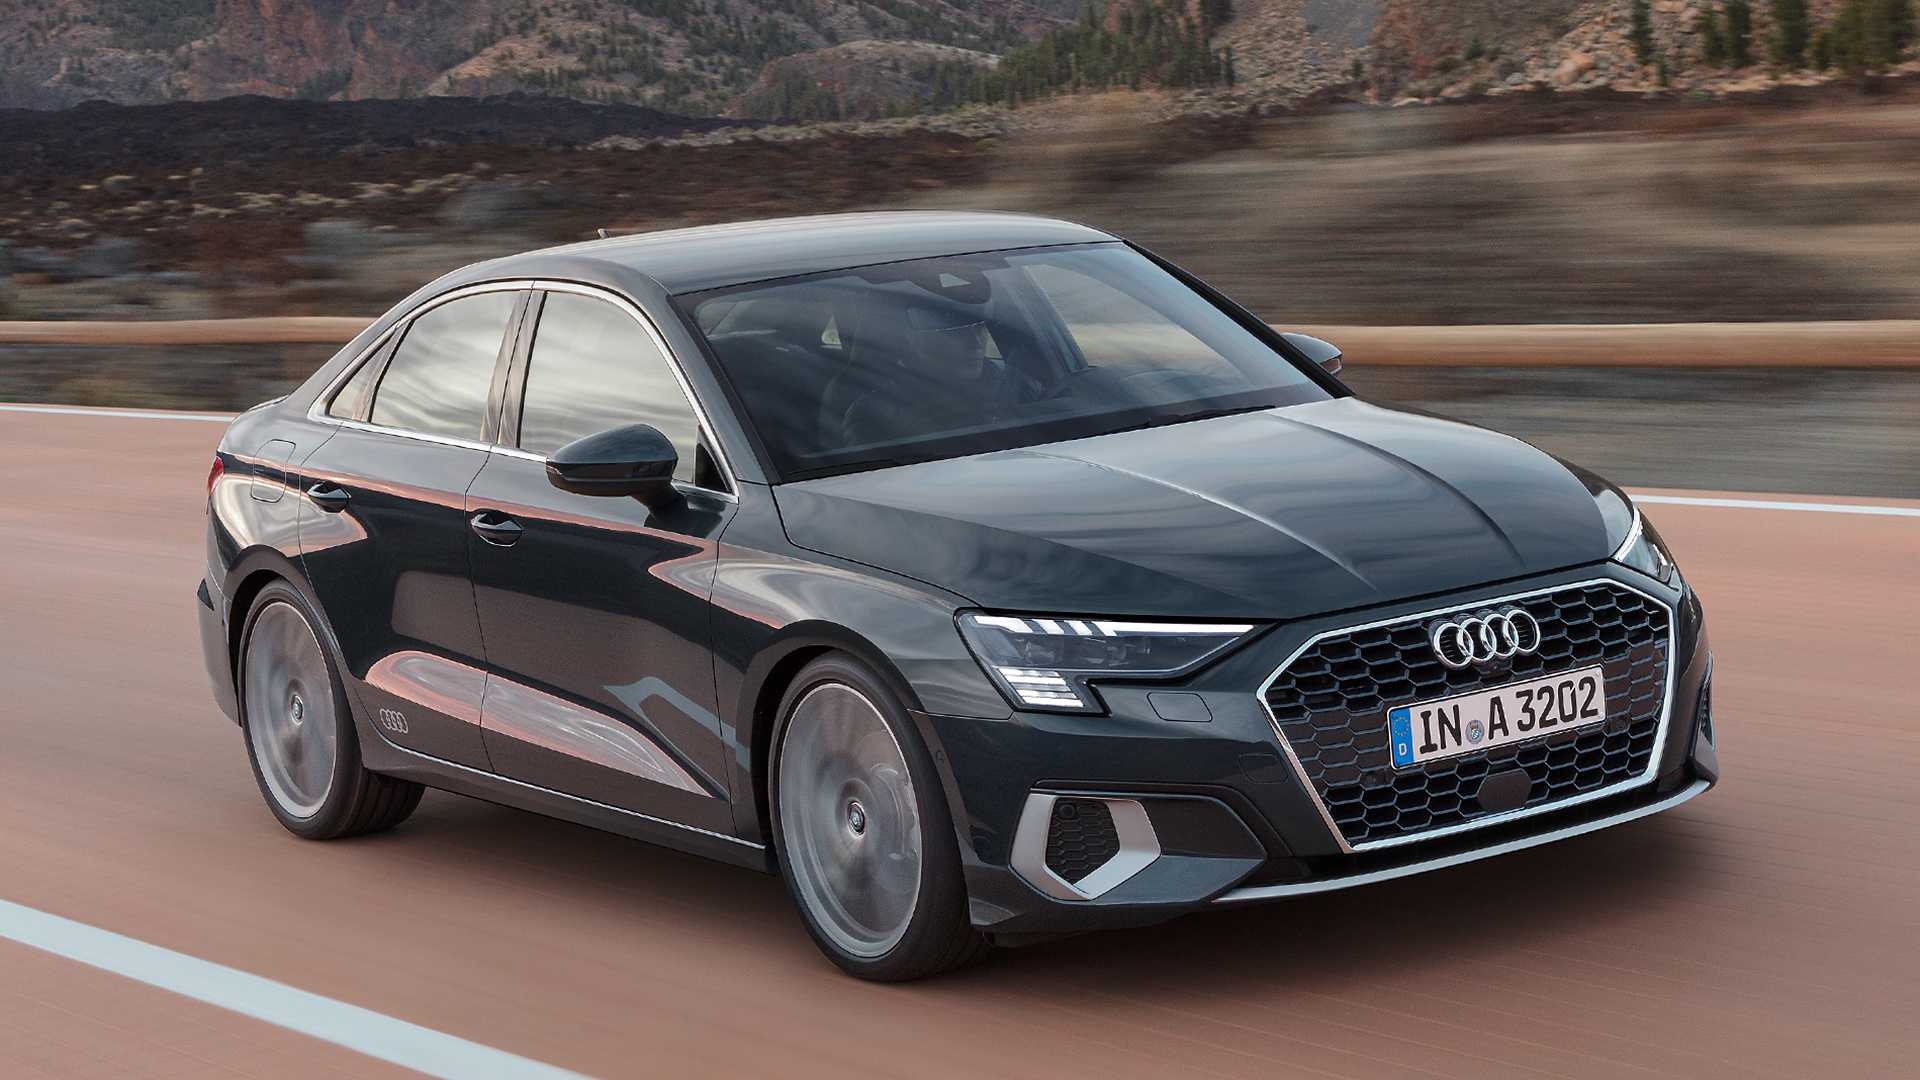 Audi A3, Sophisticated design, Premium features, State-of-the-art technology, 1920x1080 Full HD Desktop